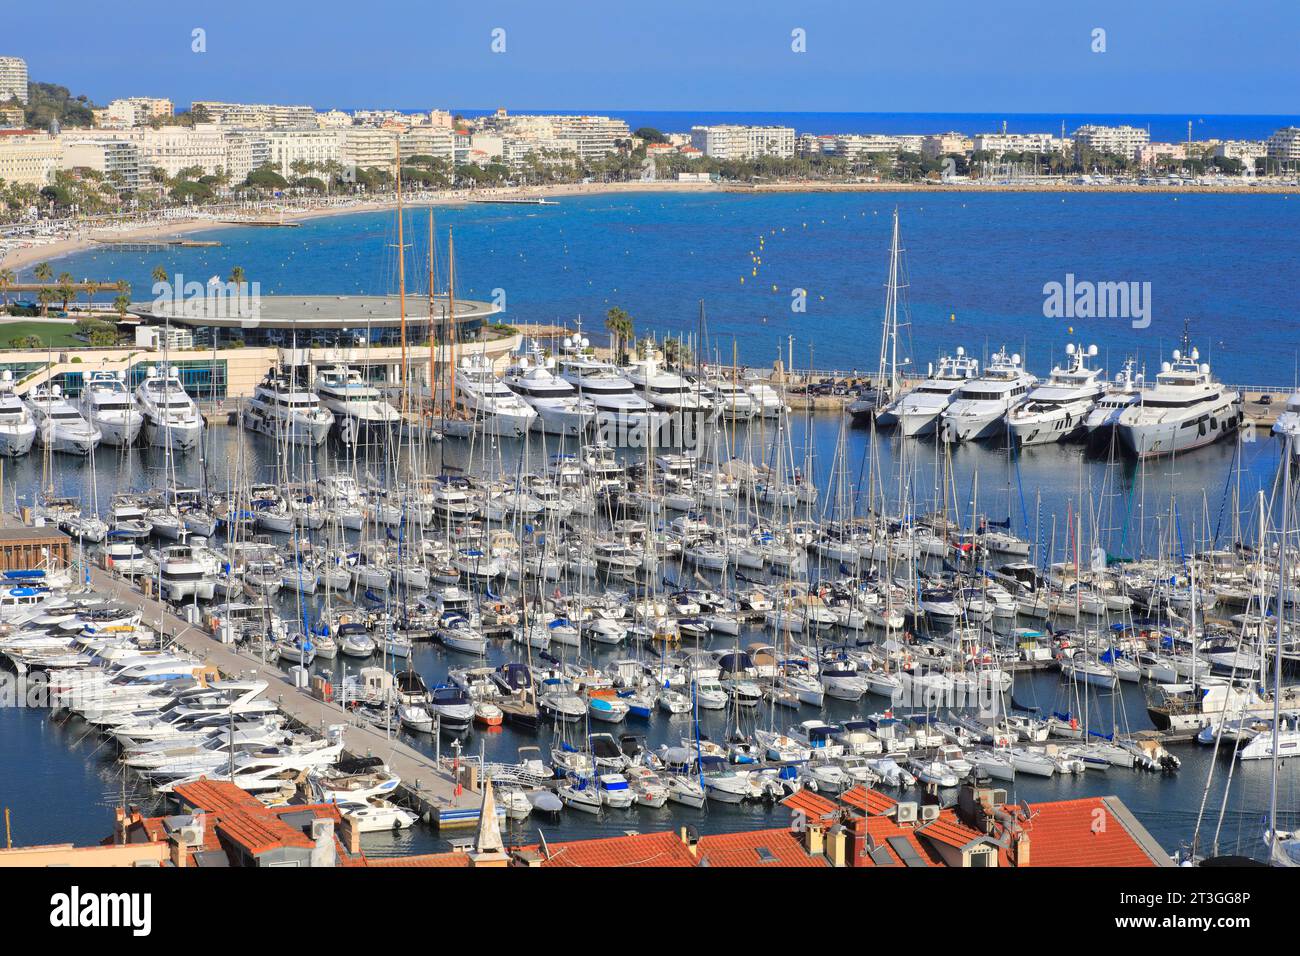 France, Alpes Maritimes, Cannes, view from Le Suquet of the Old Port, its moored boats, the Palais des festivals et des congres and the beach Stock Photo